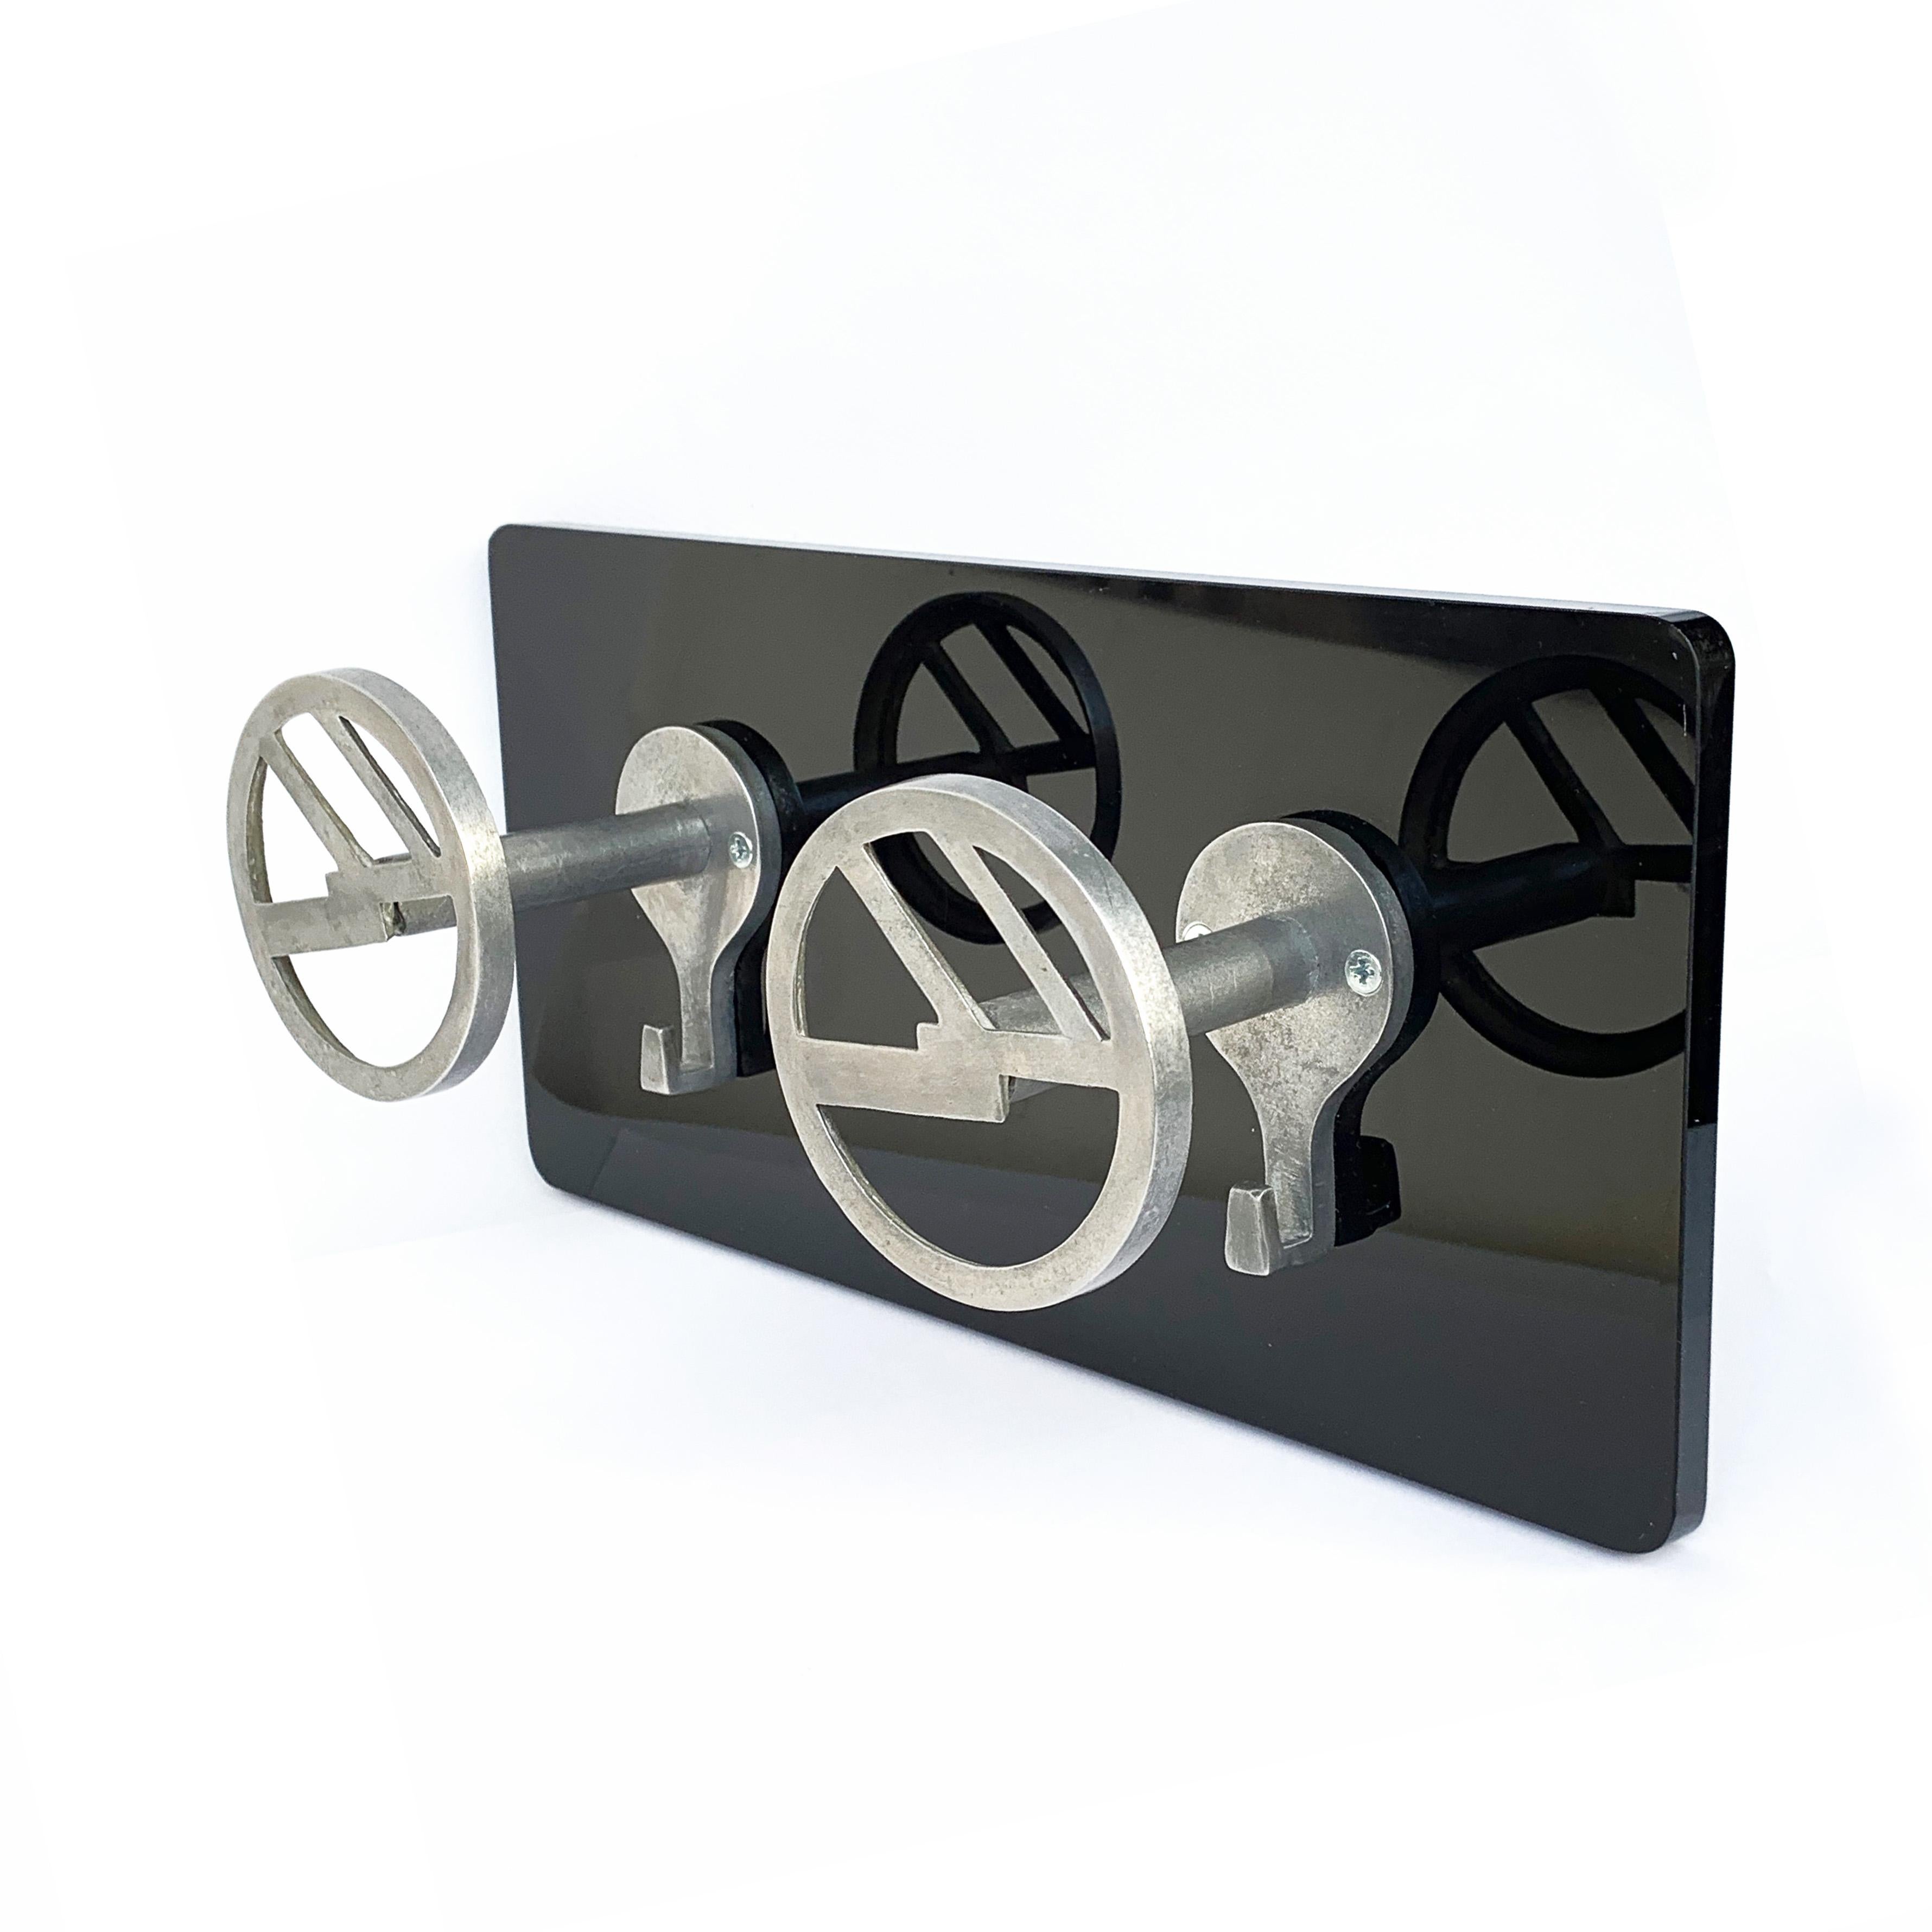 Detail of clothes hangers. The aluminium hooks are from the 1940s, mounted on a new shiny black plexiglas plate.
 